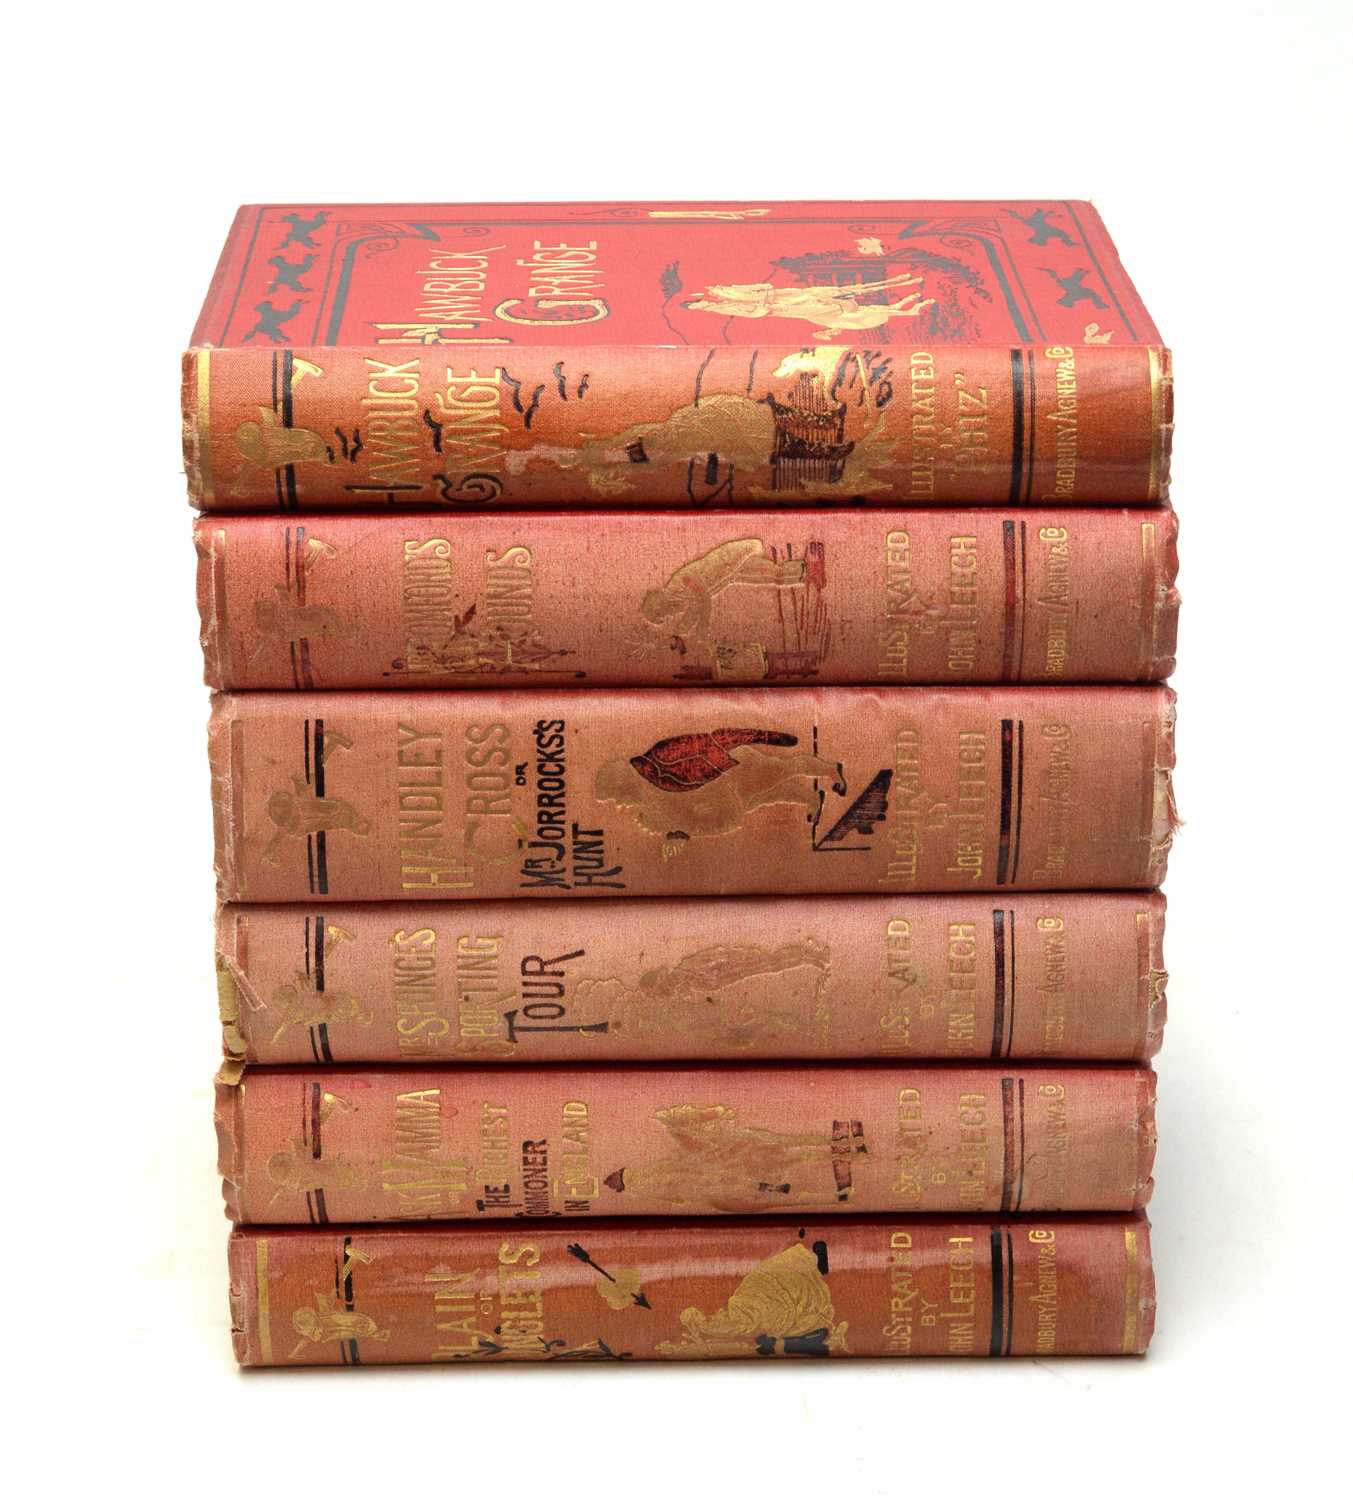 Lot 815 - Mr. Sponge's Sporting Tour, and other sporting novels by Surtees